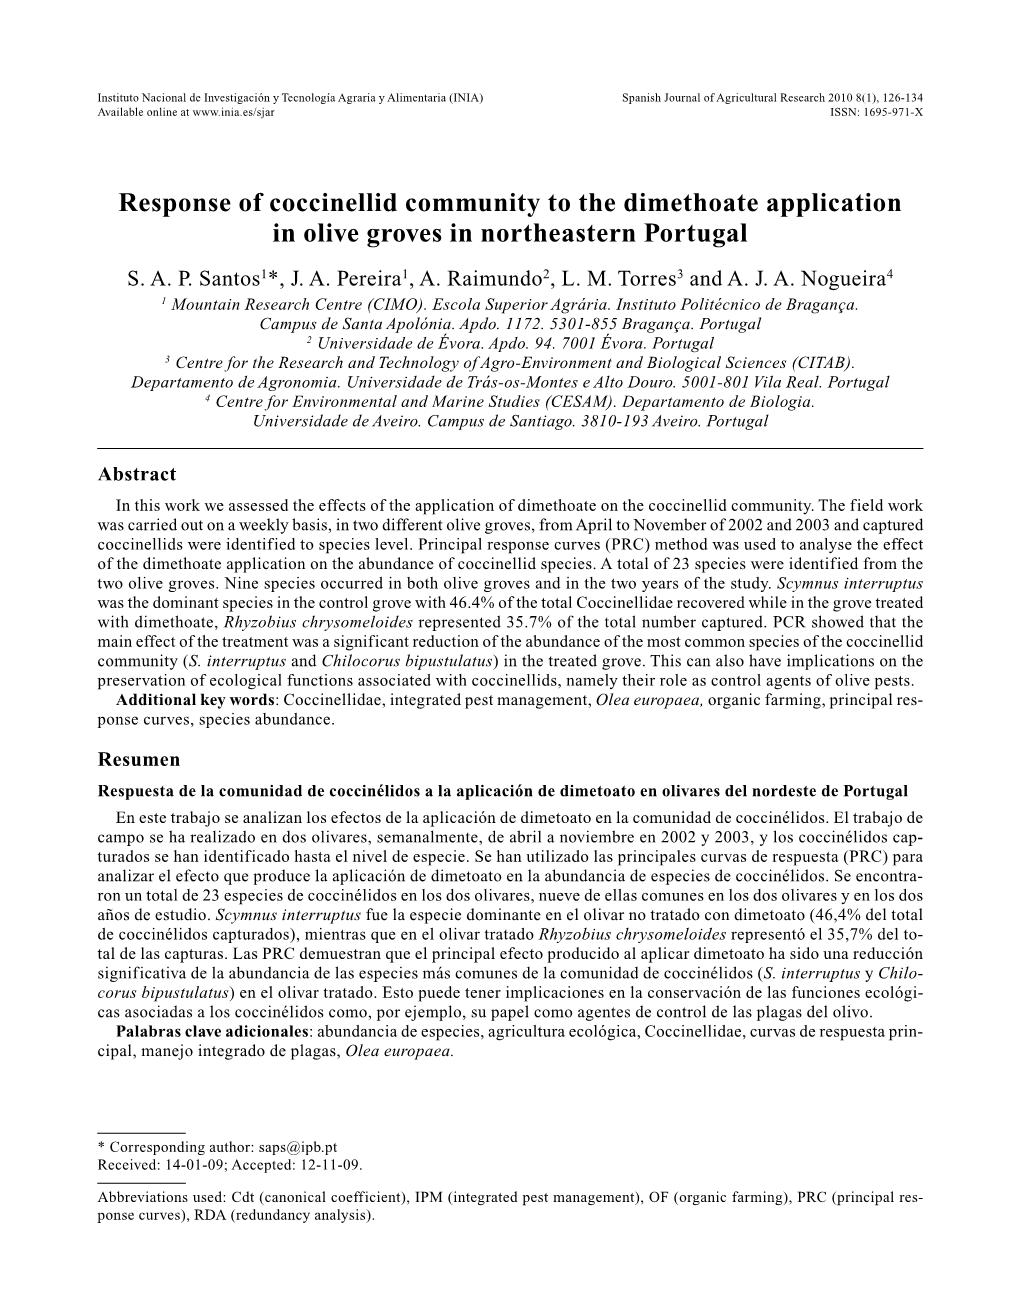 Response of Coccinellid Community to the Dimethoate Application in Olive Groves in Northeastern Portugal S